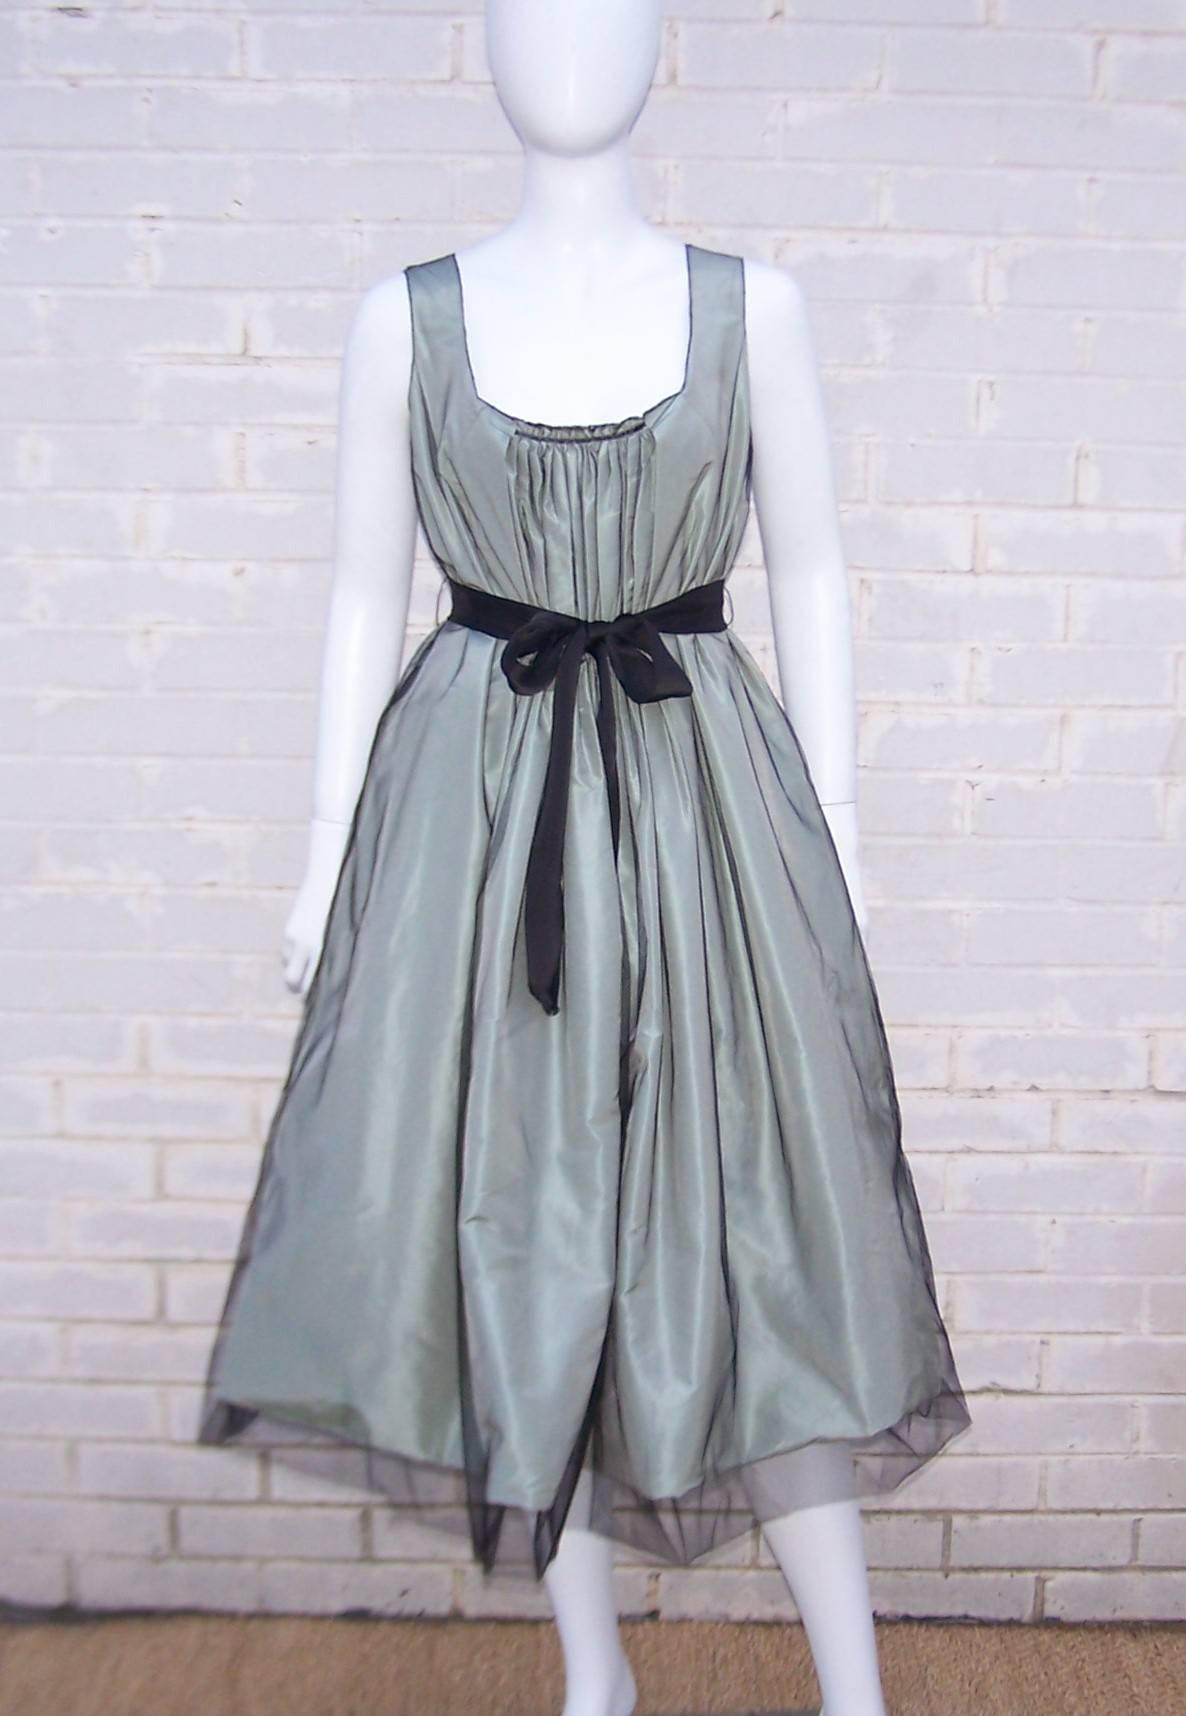 Oh the luxury and opulence of an Oscar de la Renta dress!  This modern rendition of a ballerina silhouette has old school romanticism and stylish construction in one package.  The sage green silk taffeta dress zips and hooks at the side with